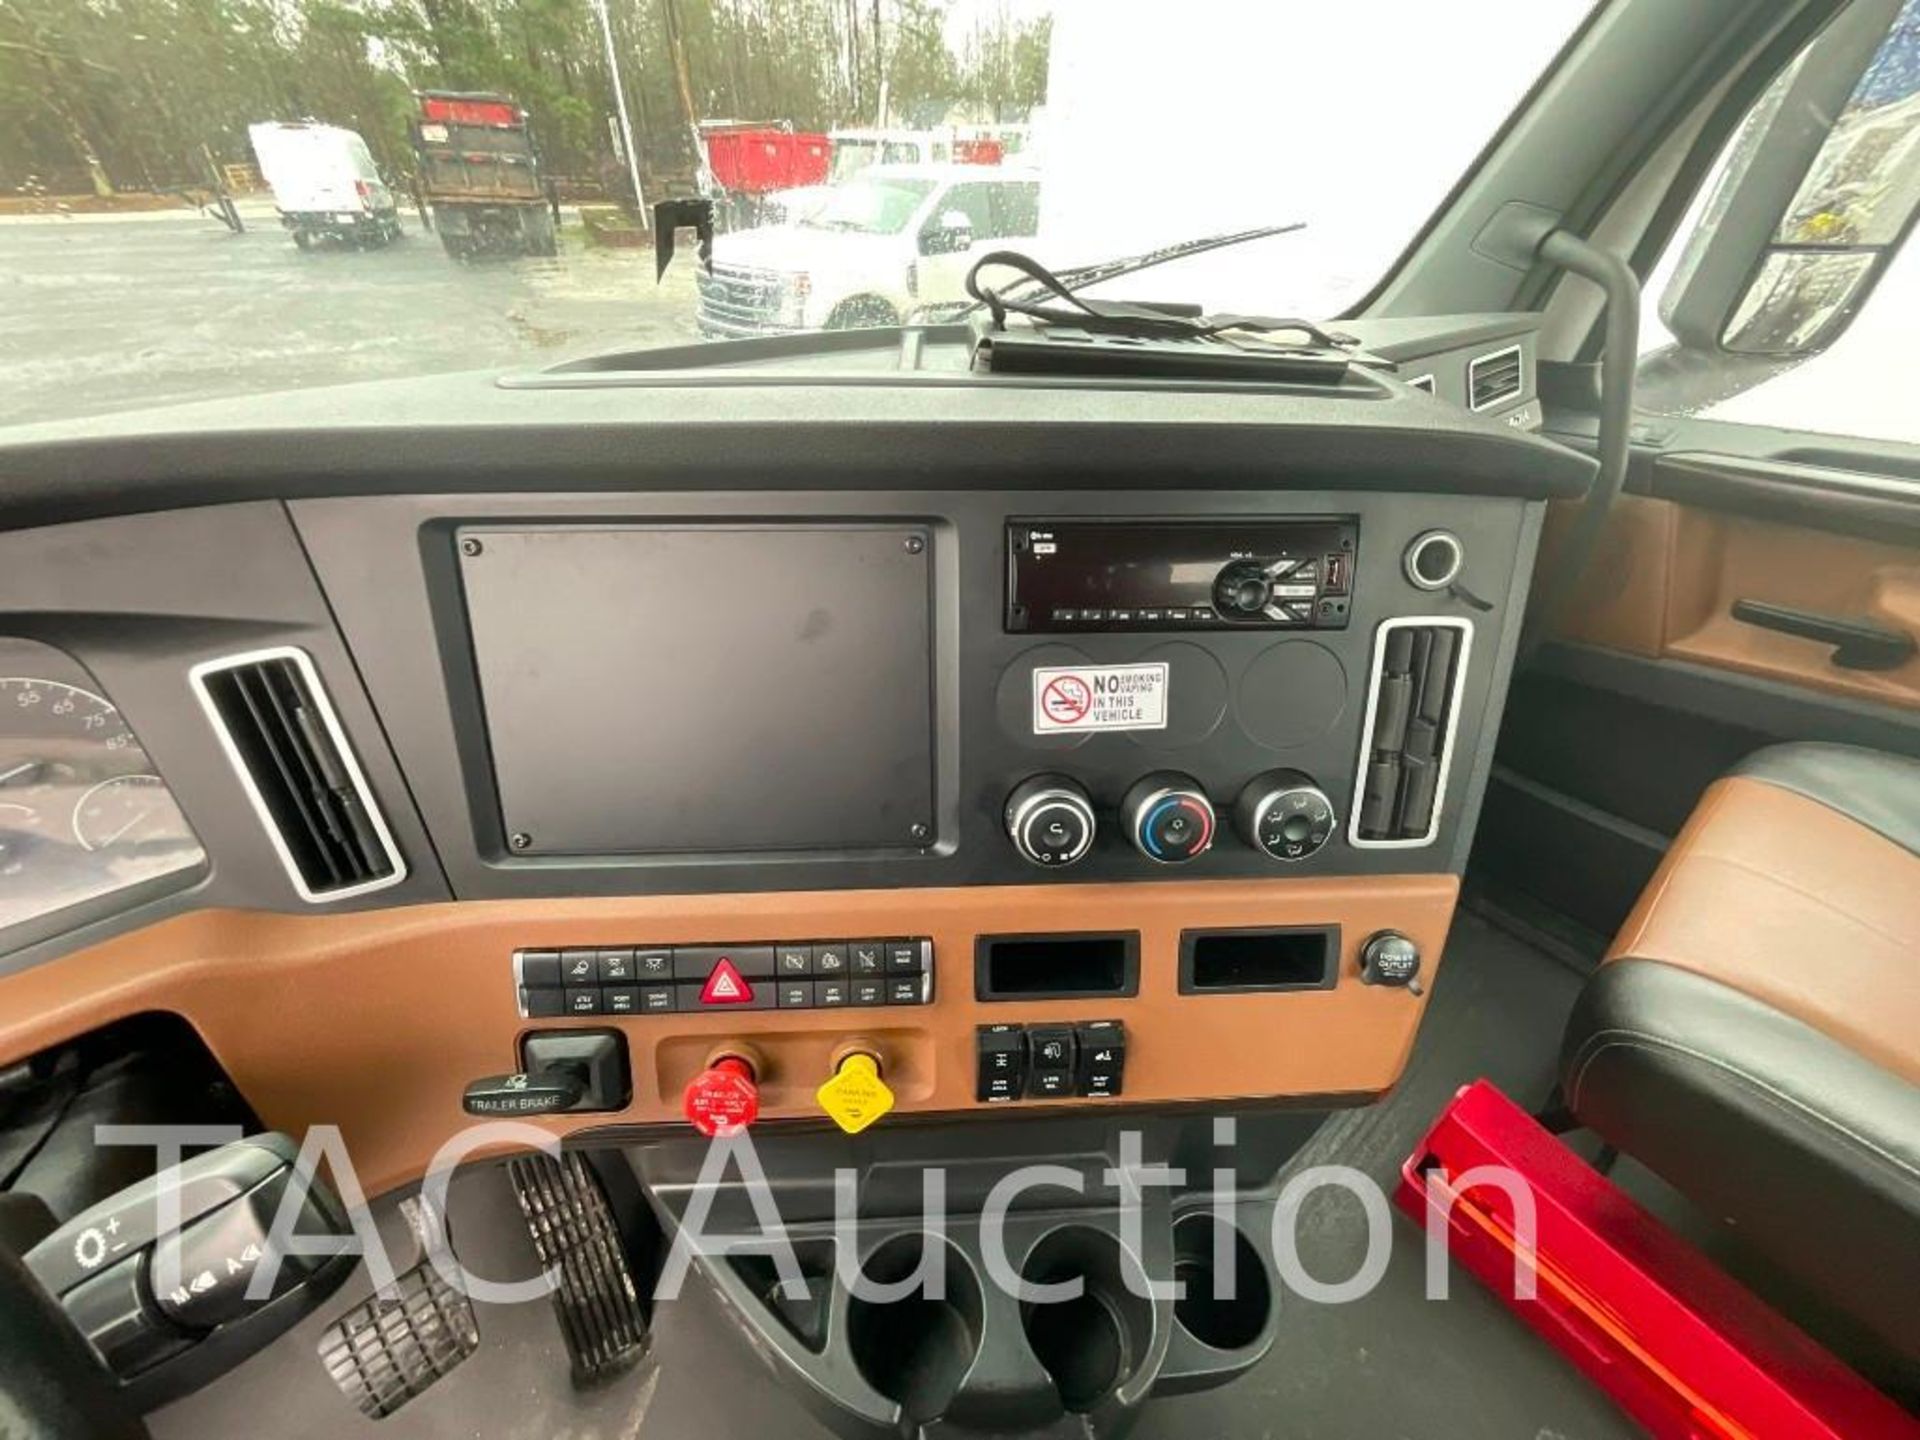 2019 Freightliner Cascadia Day Cab - Image 23 of 59